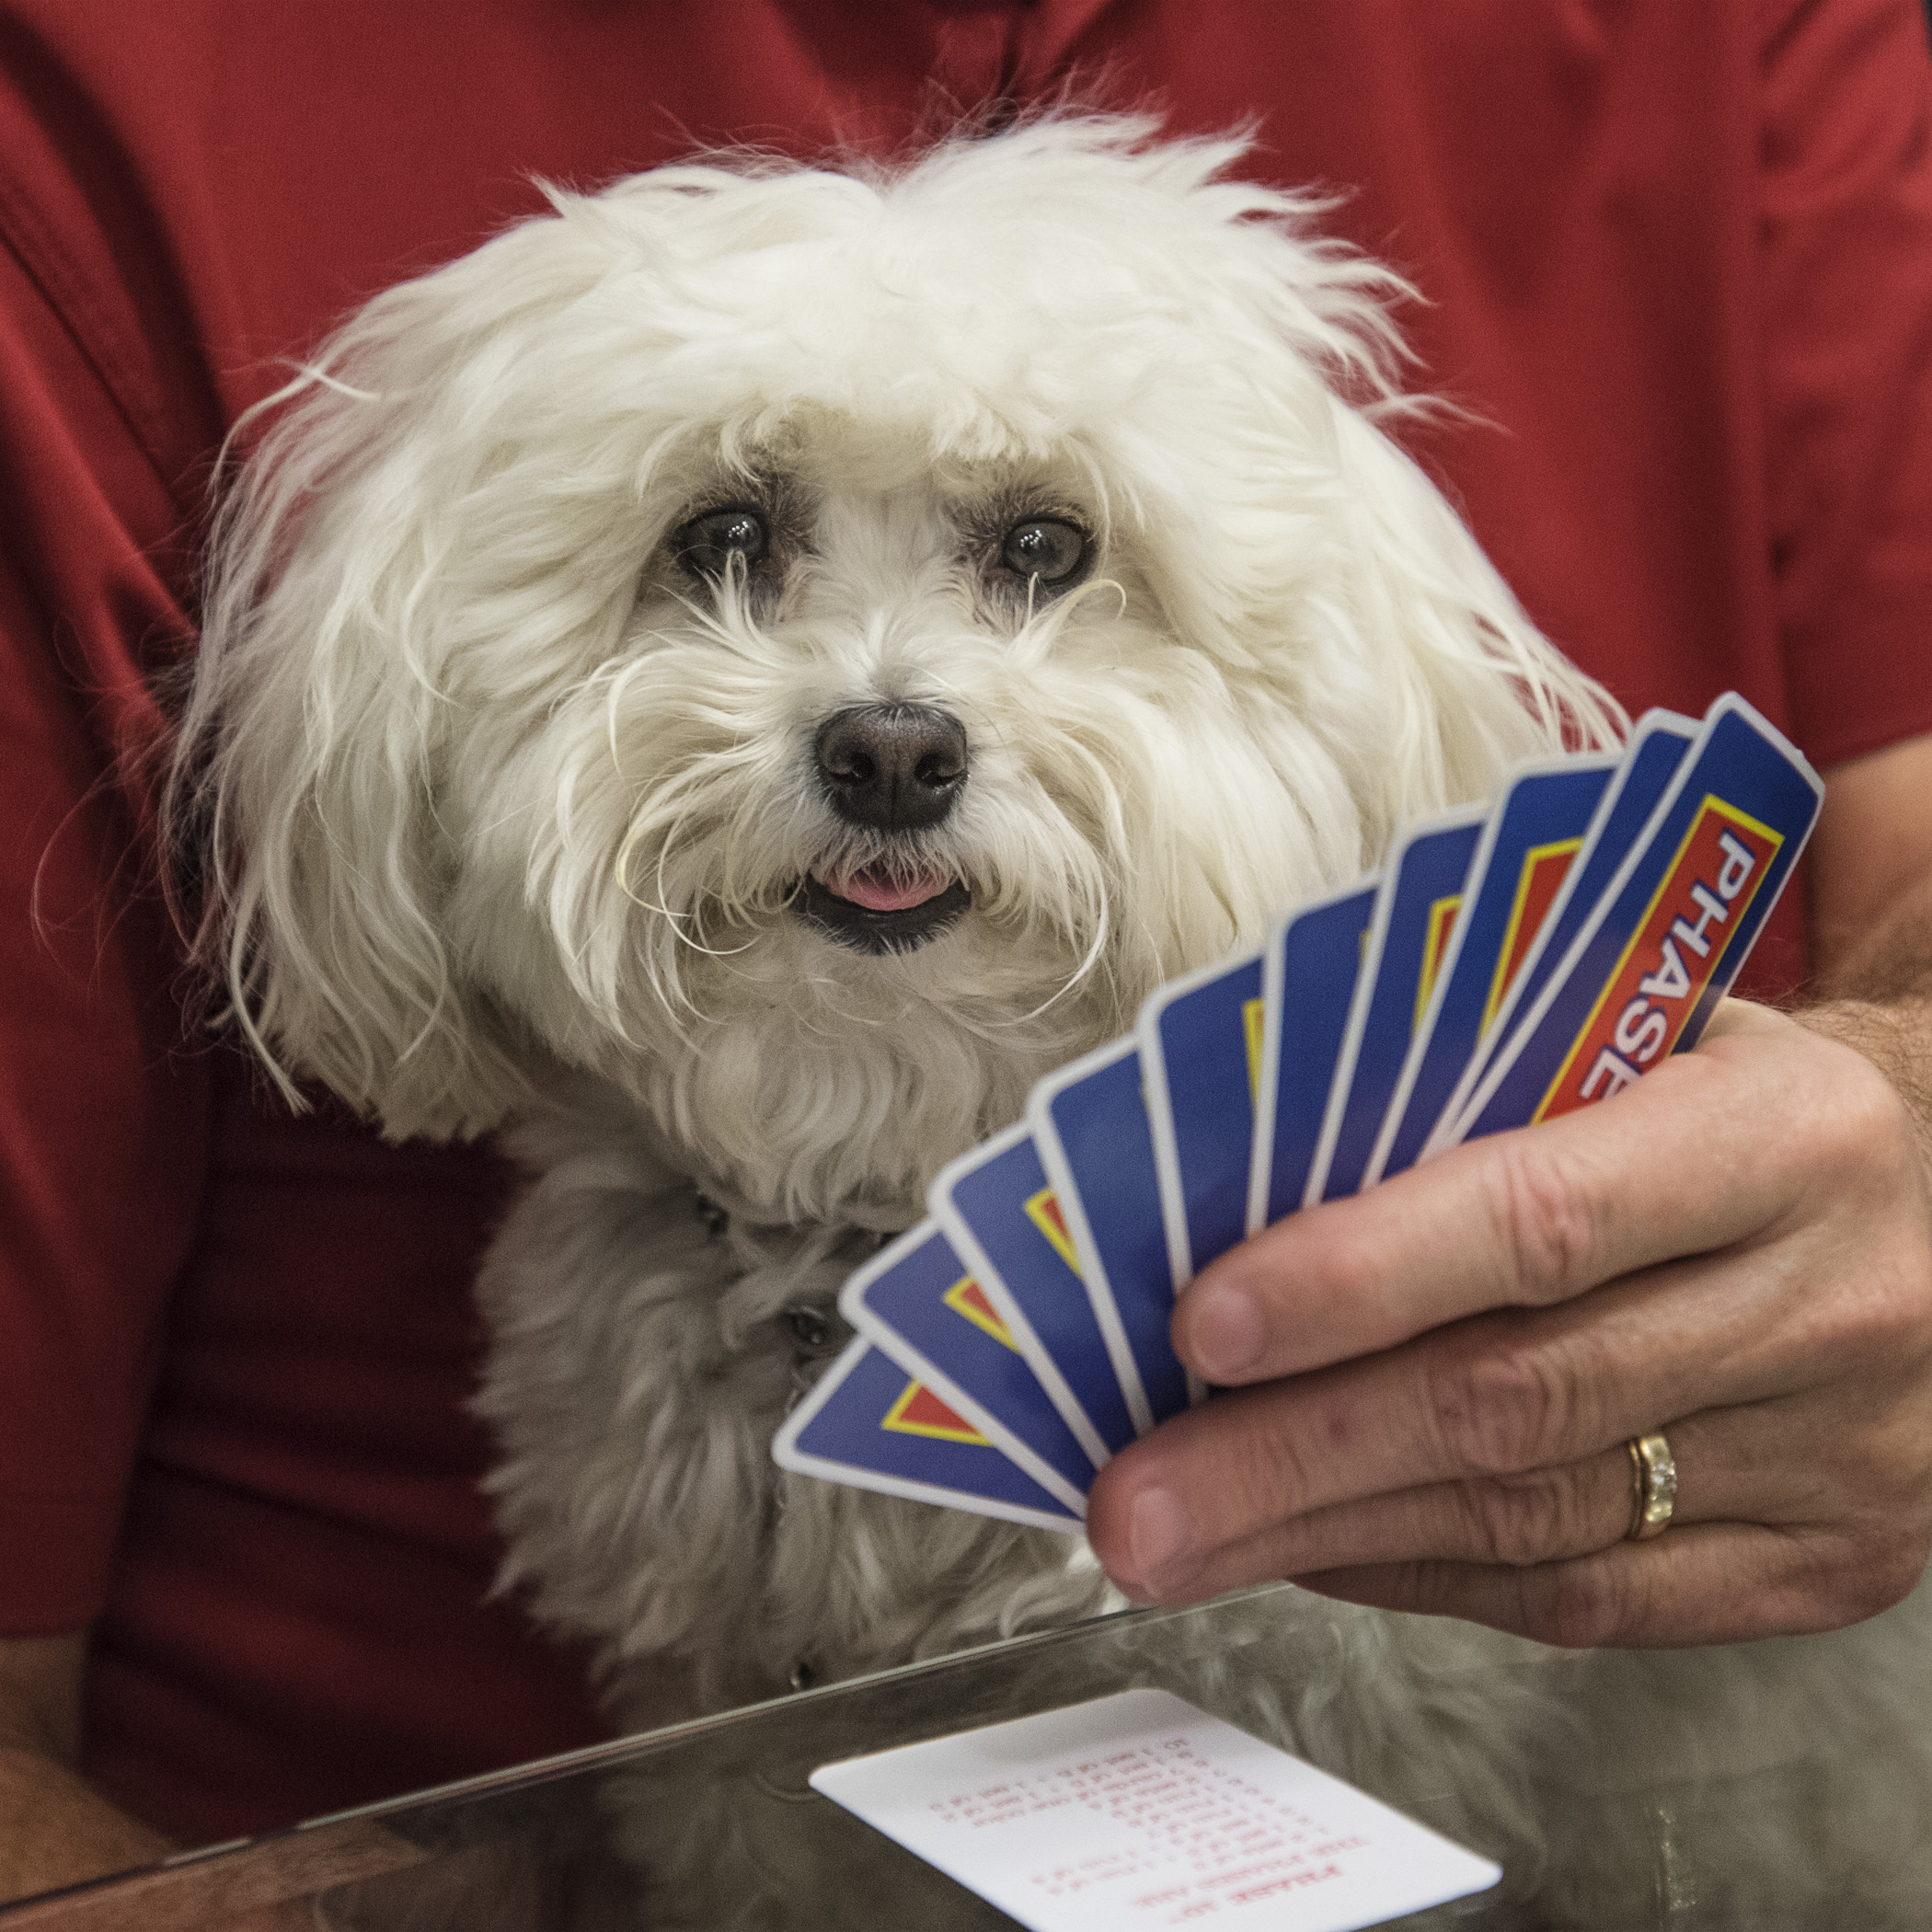  Okay, Grandpa, I’m really good at cards. Follow my lead and there’s no way you can lose. 